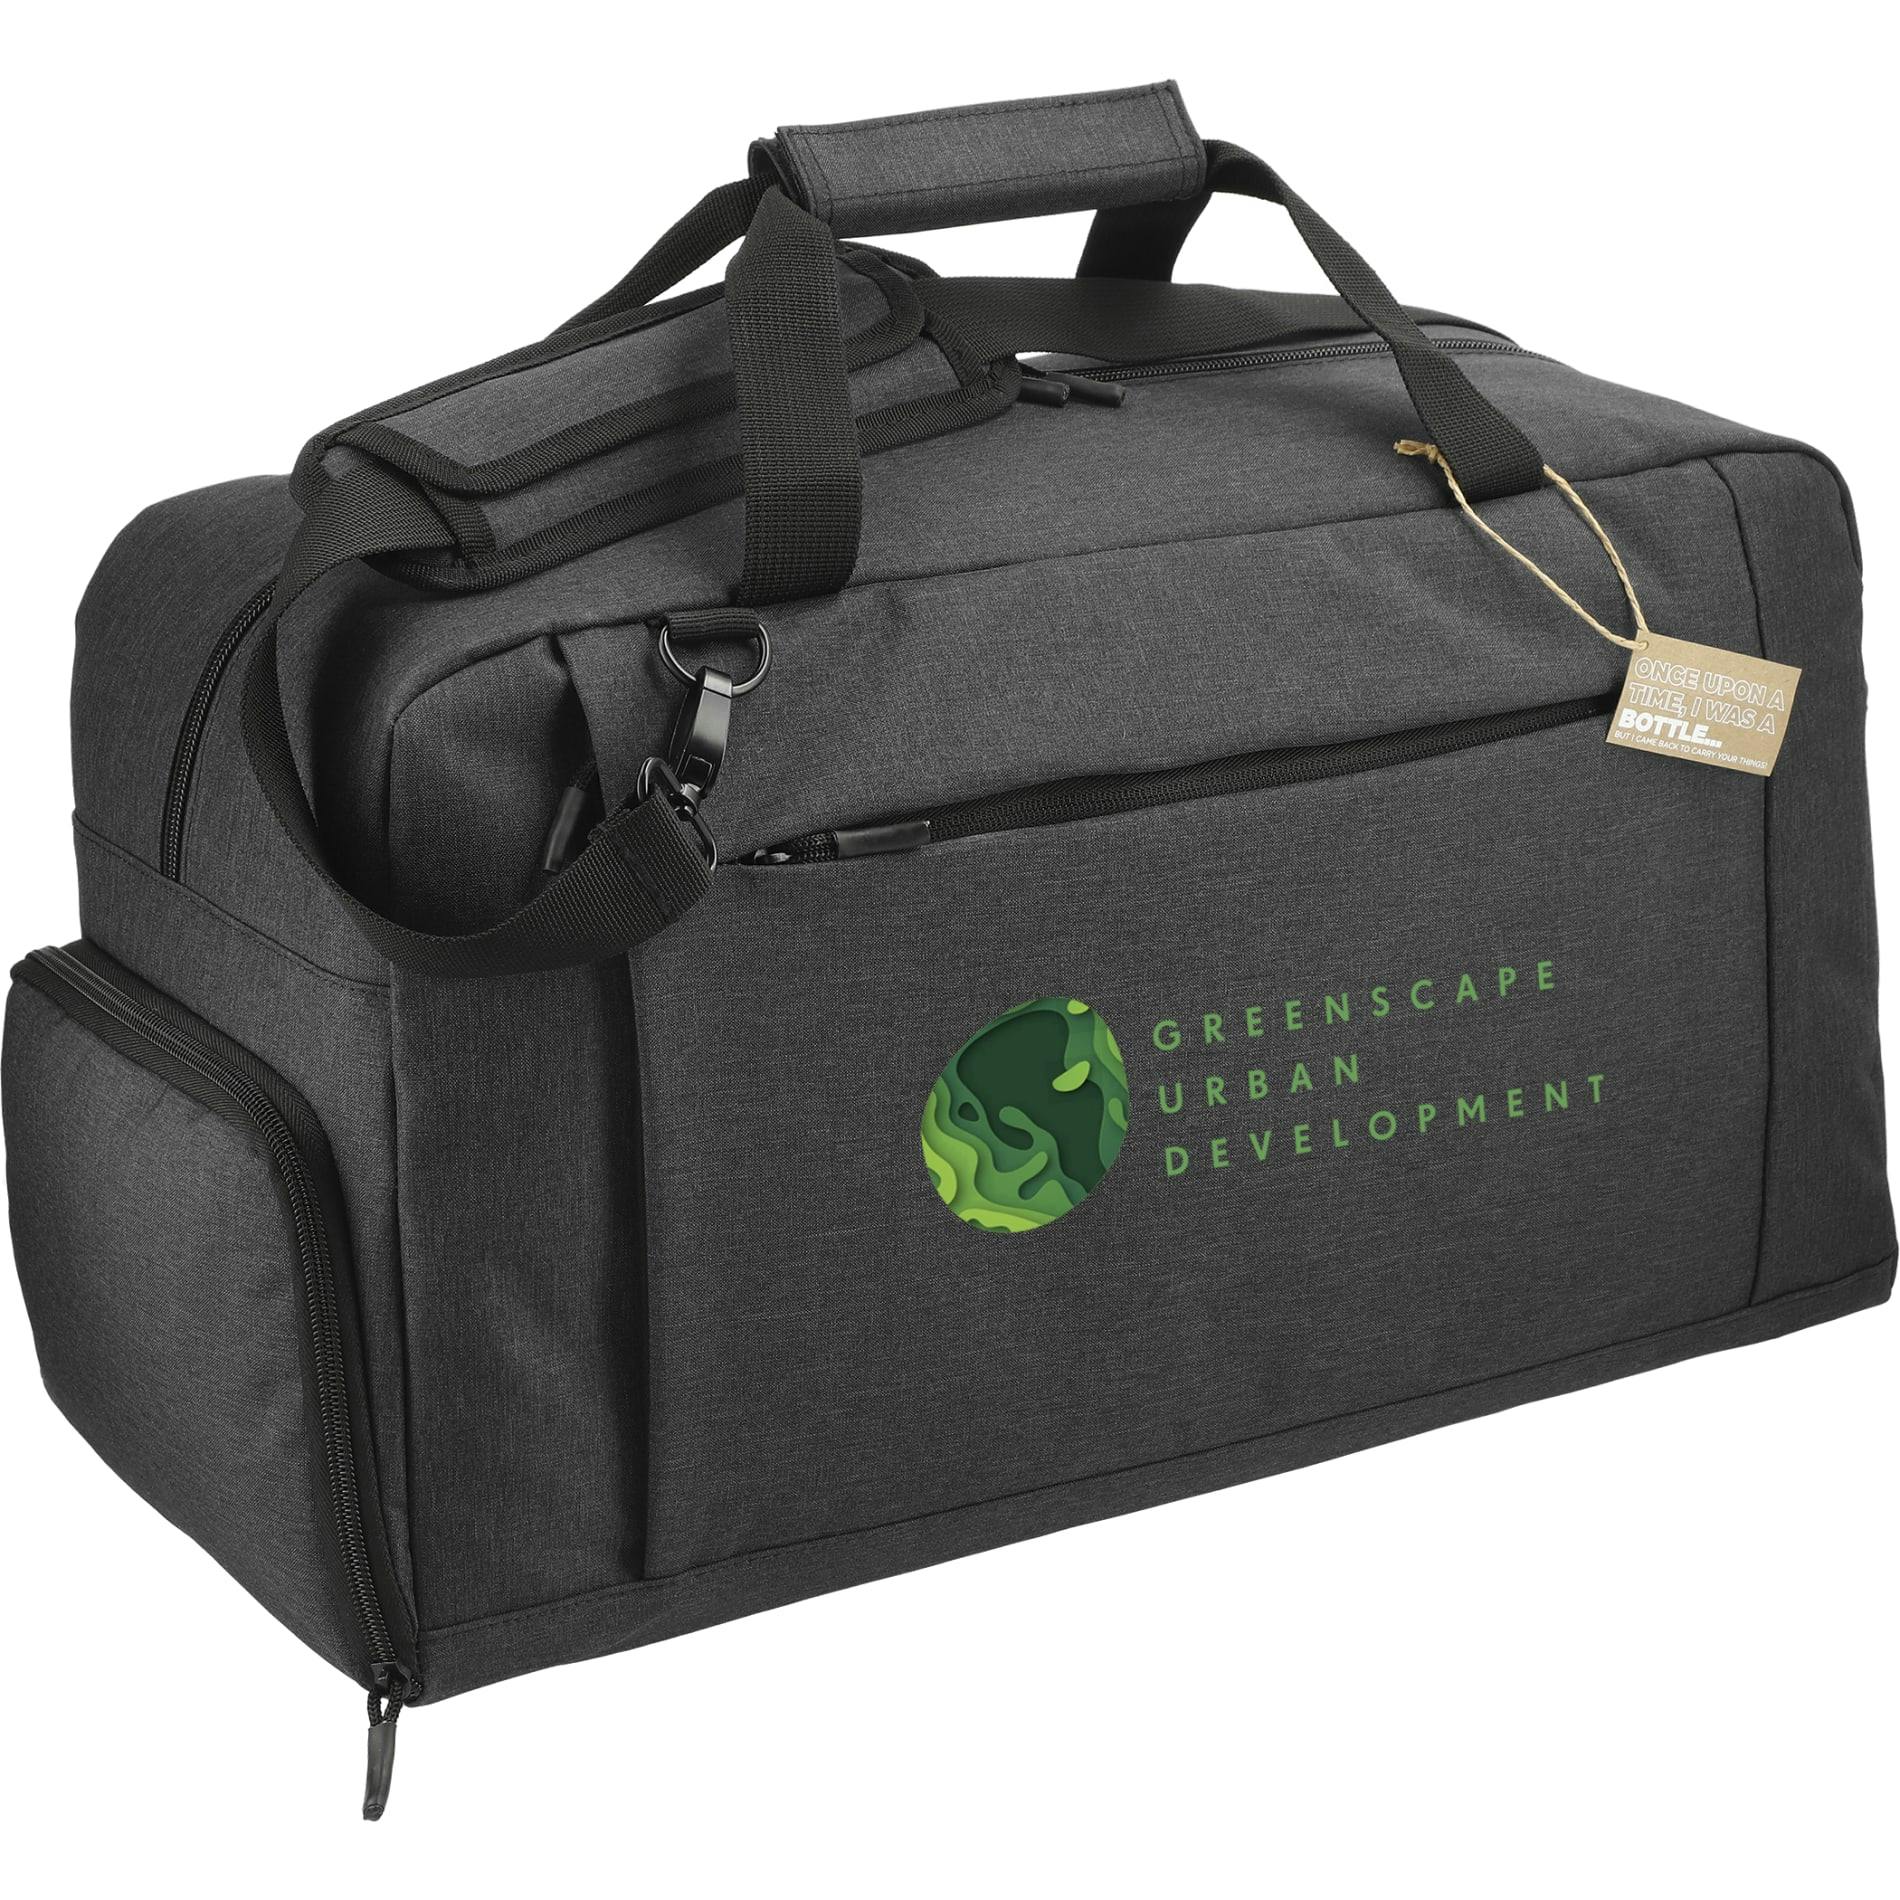 Aft Recycled 21" Duffel - additional Image 3